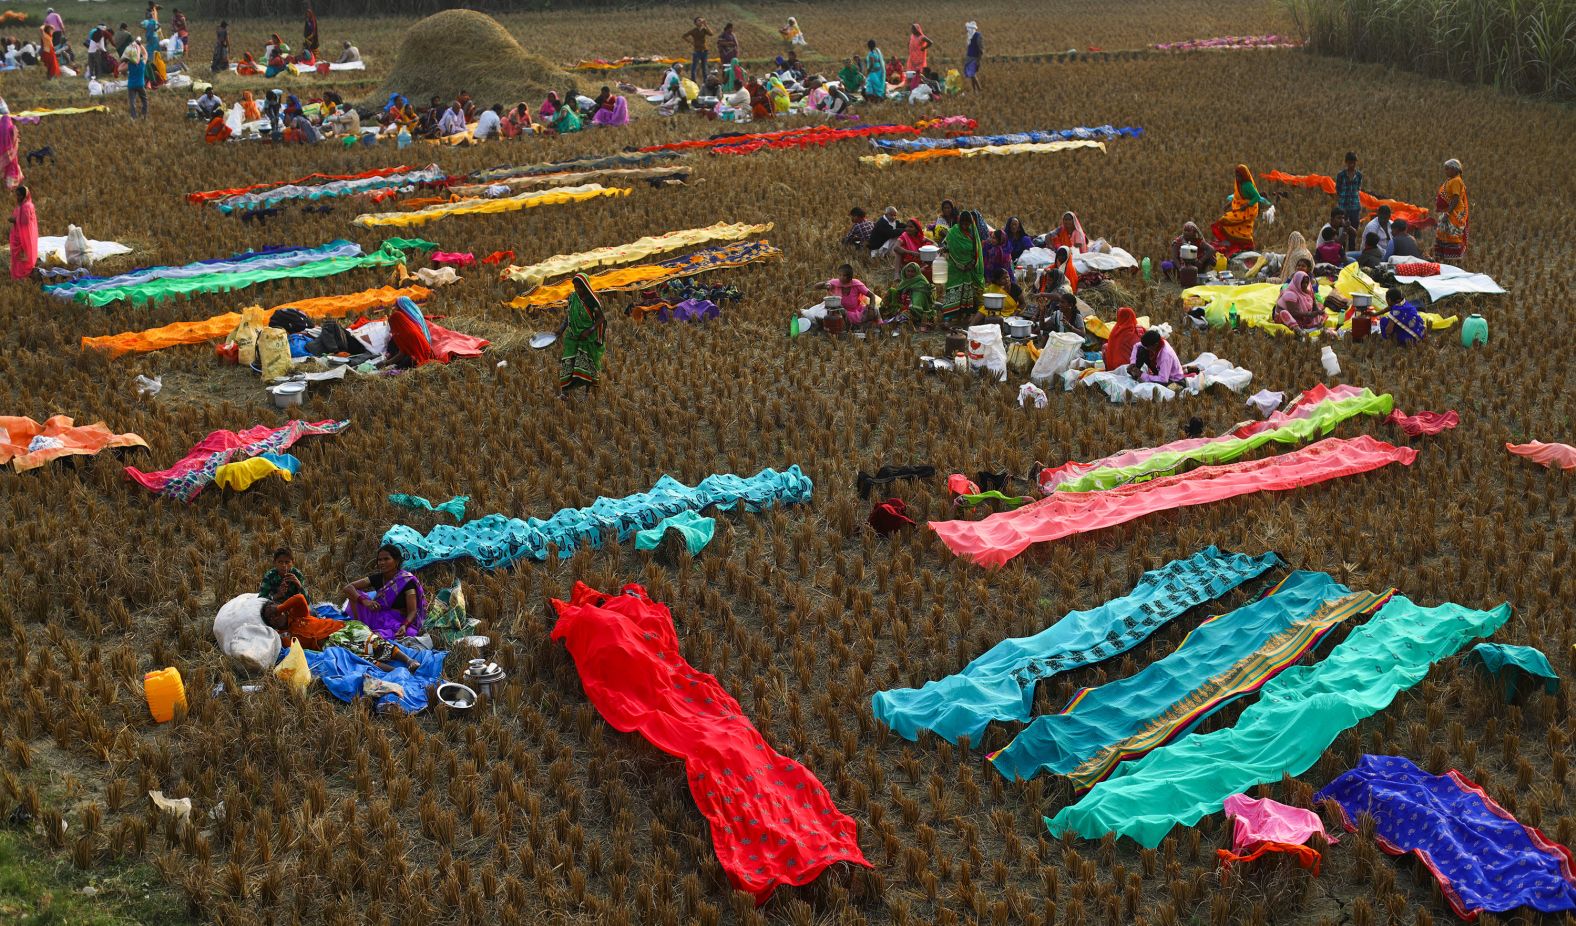 Devotees prepare to spend the night under open sky ahead of the festival's main day.